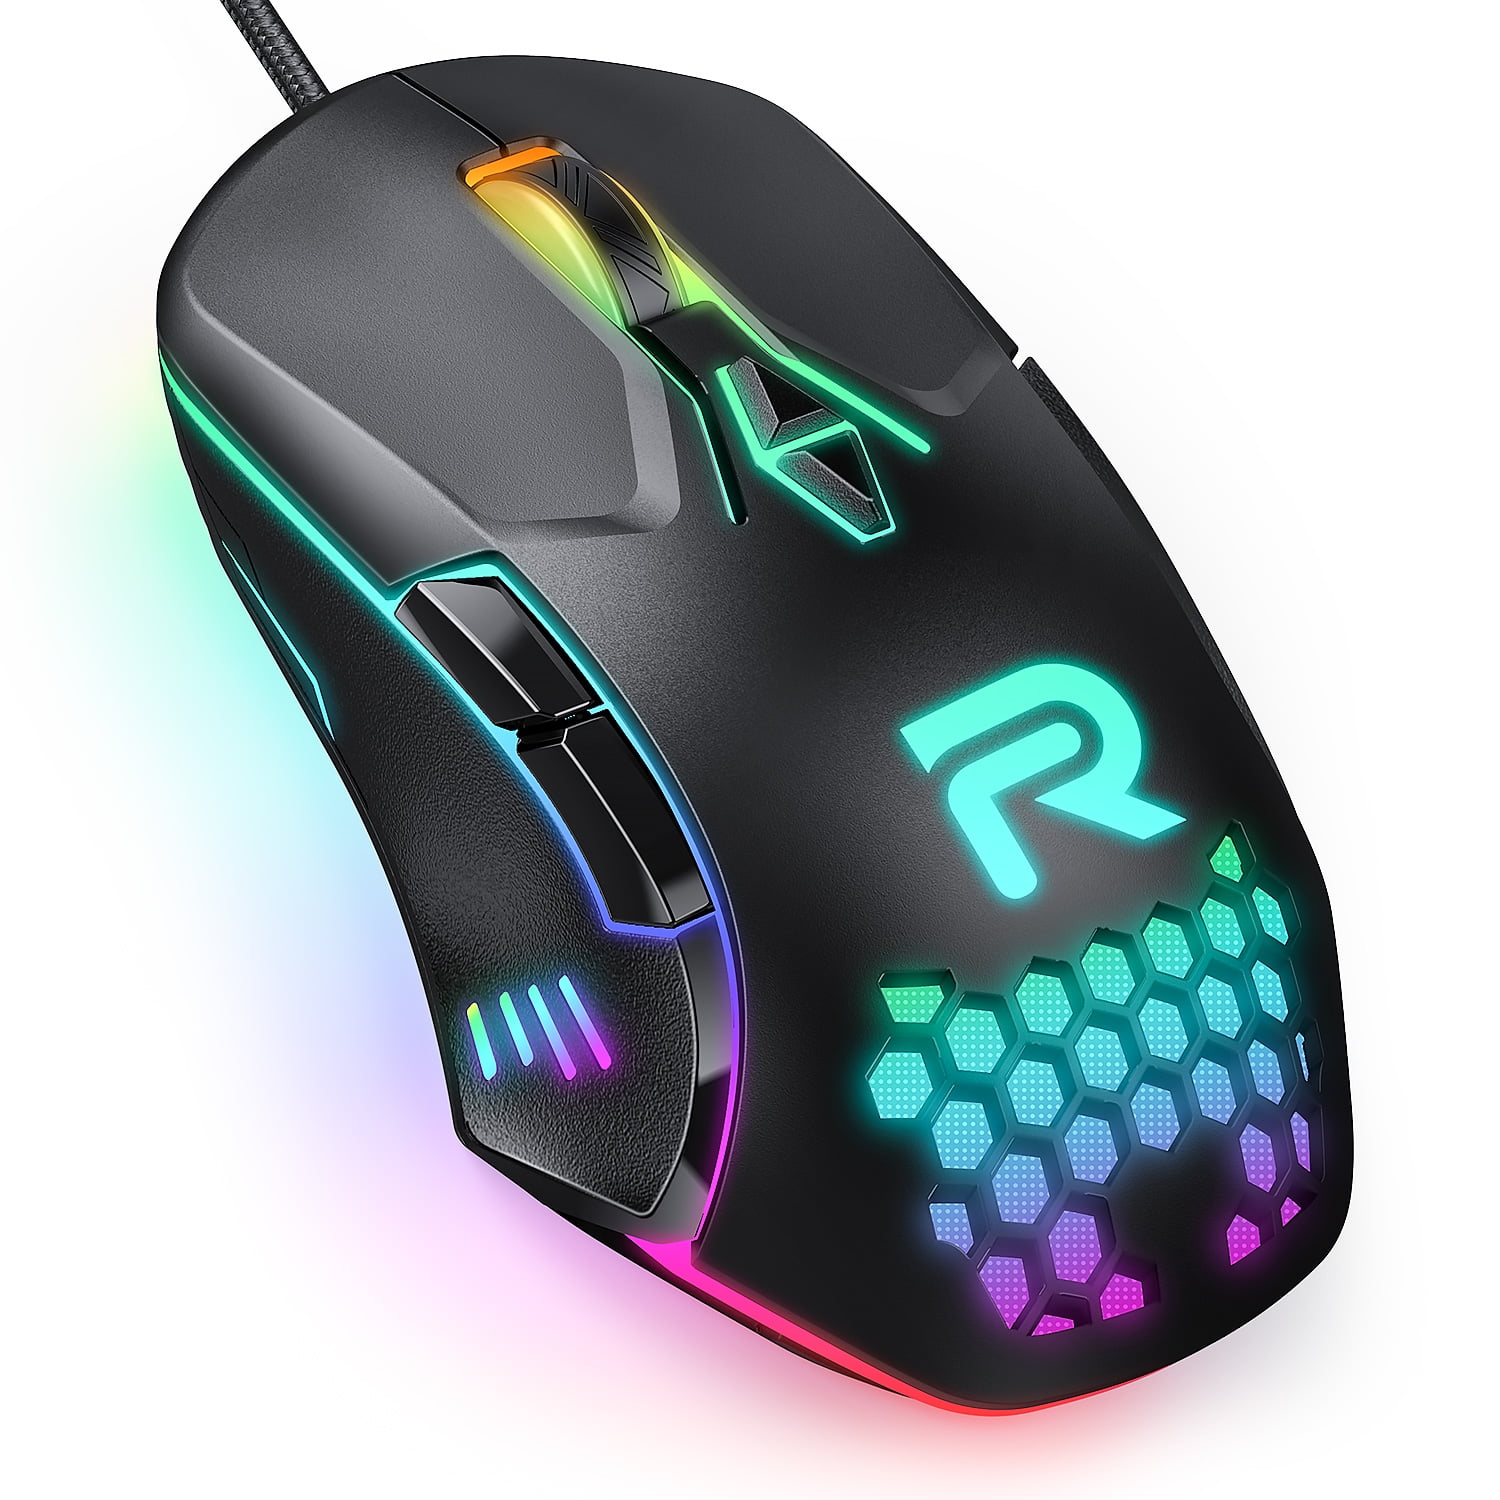 Buy RPM Euro Games Rubber Coated USB Gaming Mouse with 7 Color RGB